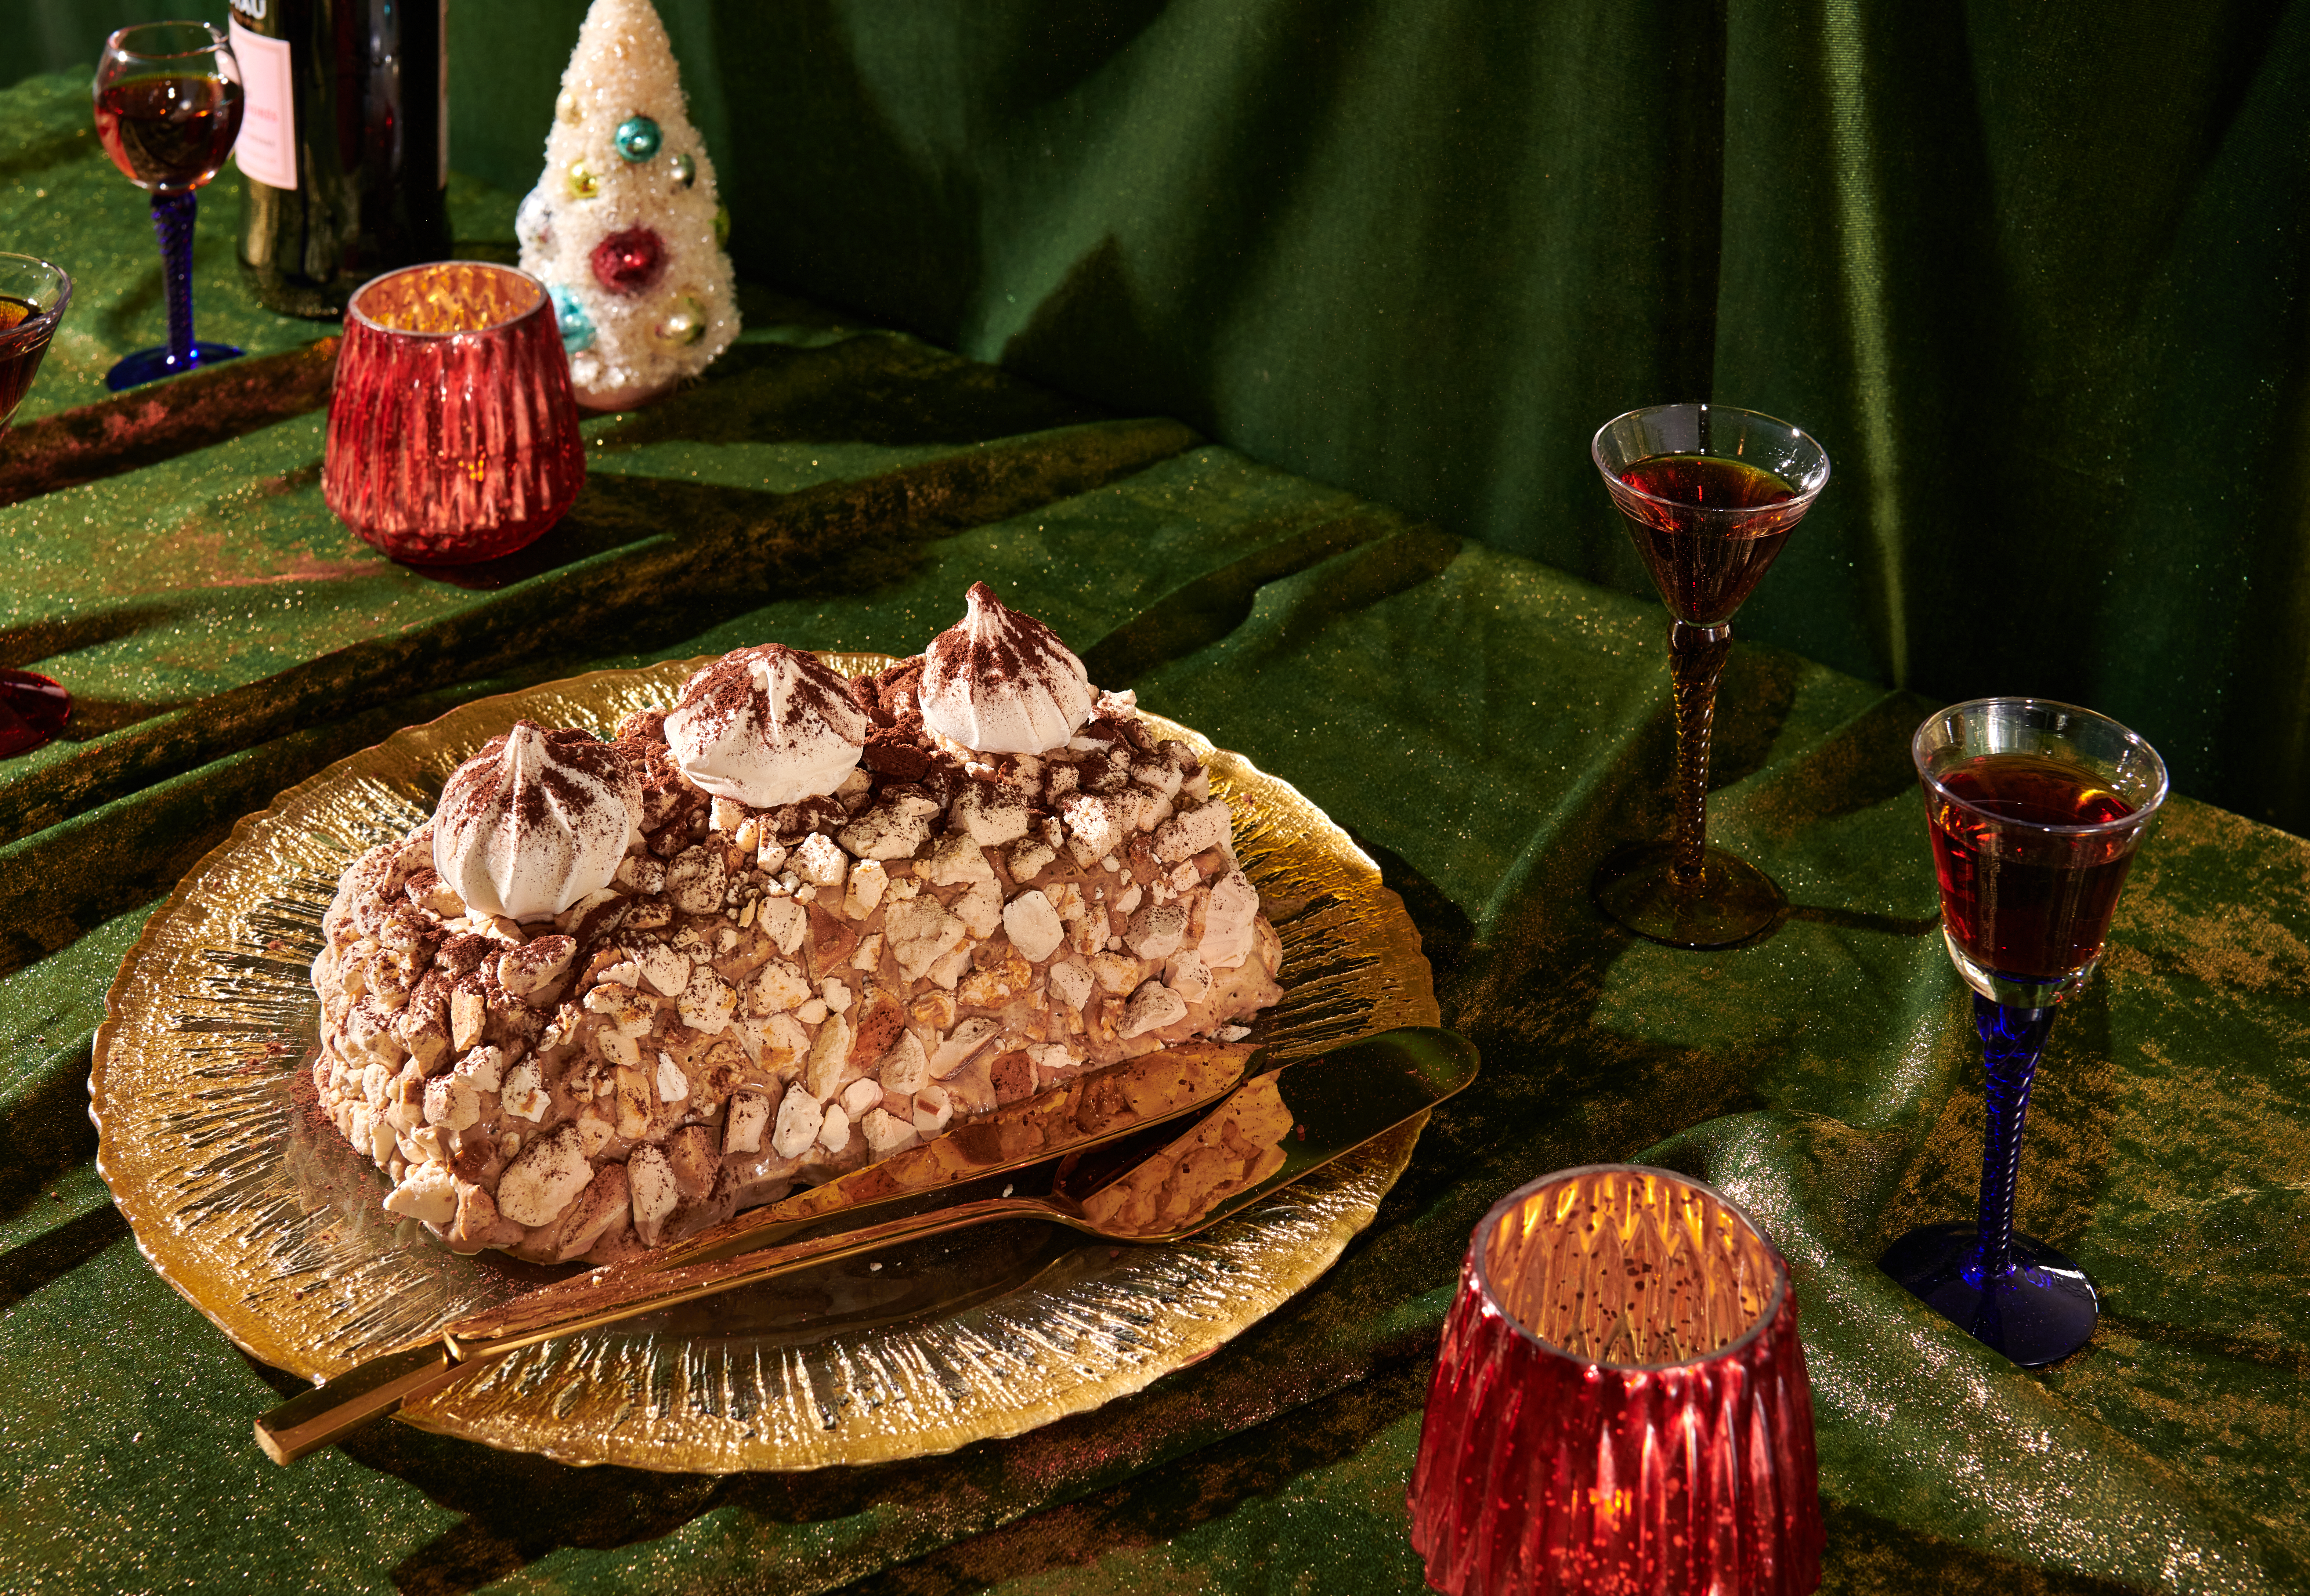 A coffee meringue served on a glittery gold platter.